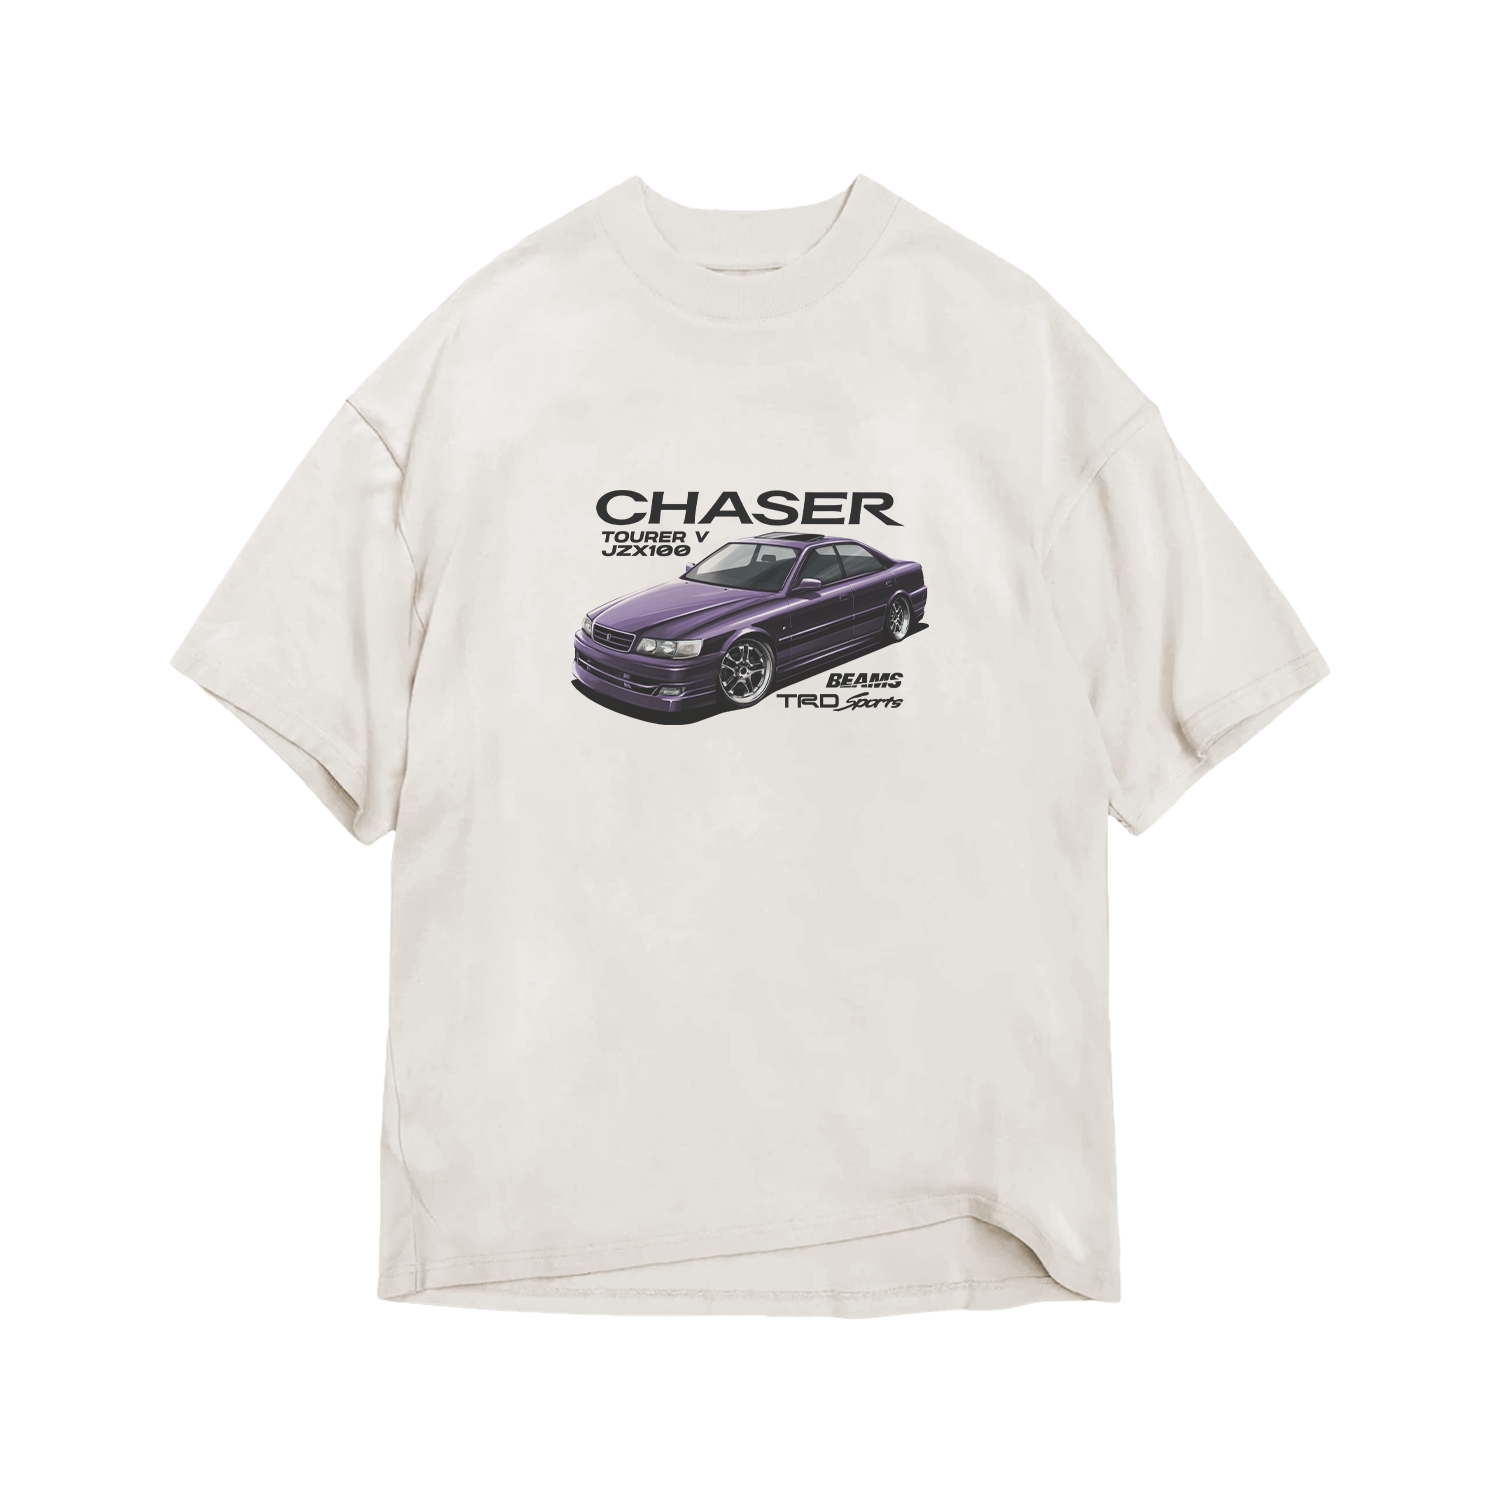 JZX100 Chaser T-Shirt